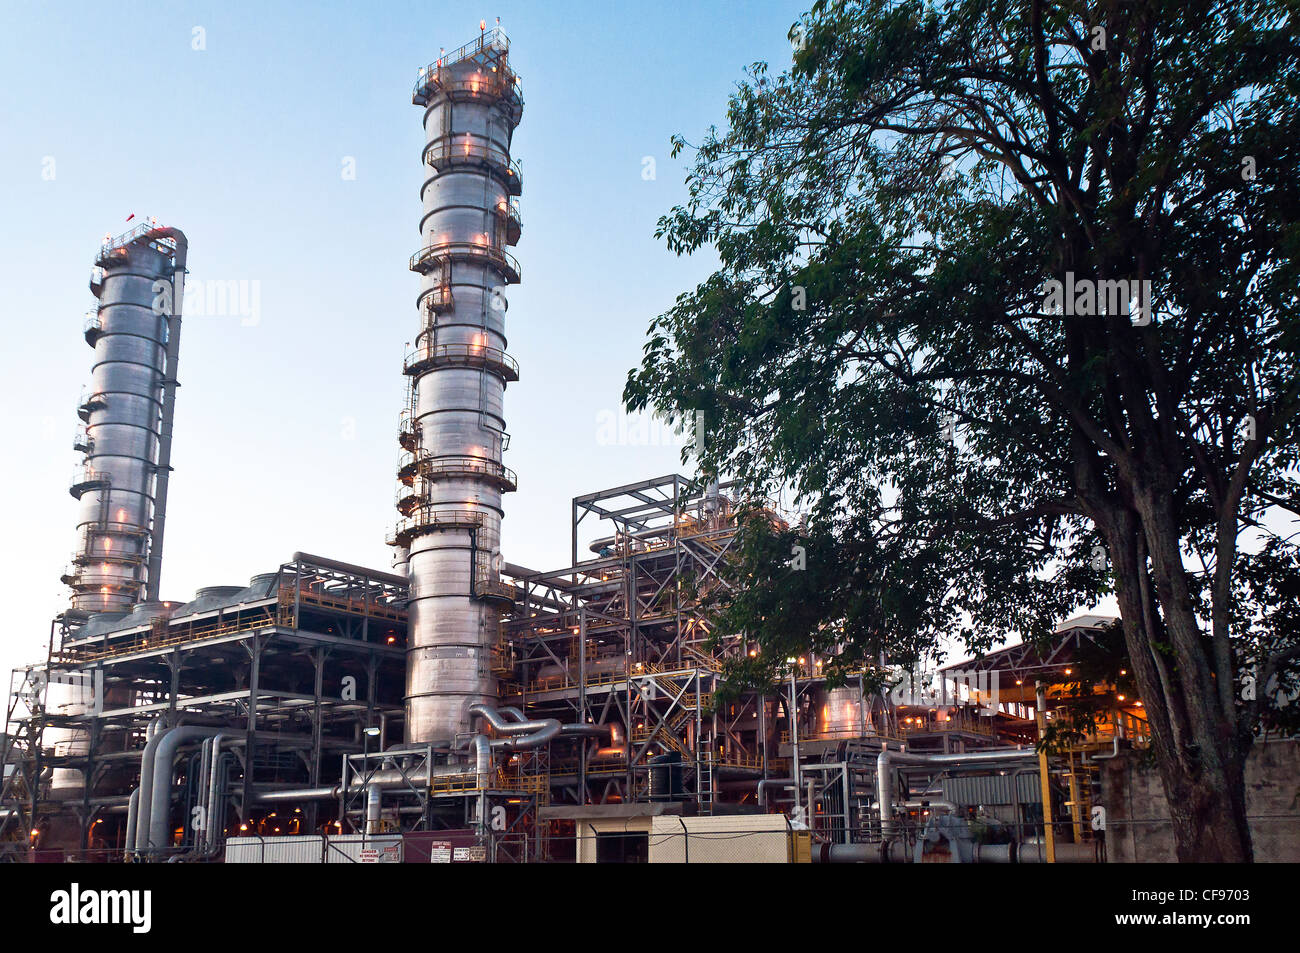 A methanol plant in San Fernando. Methanol is a common industrial chemical blended liquid transportation fuel. Stock Photo